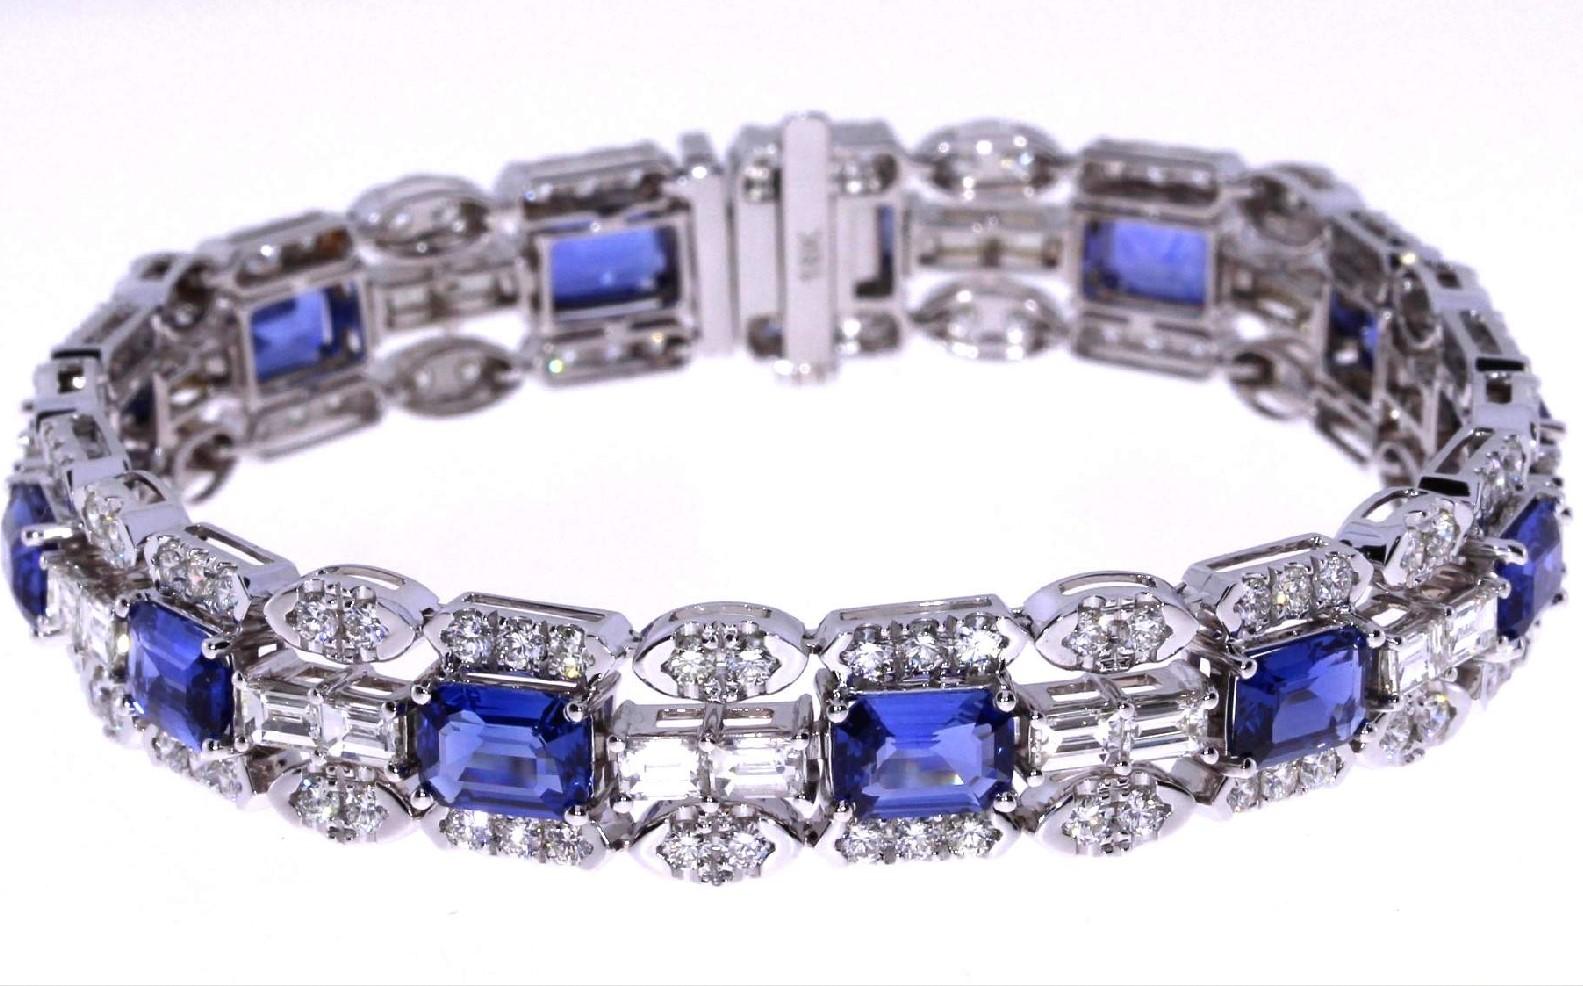 Handmade
18K White Gold
13.18ct Total Sapphire
6.58ct Total Diamond
Signature Ounce Design 
Designed, Handpicked, & Manufactured From Scratch In Los Angeles Using Only The Finest Materials and Workmanship